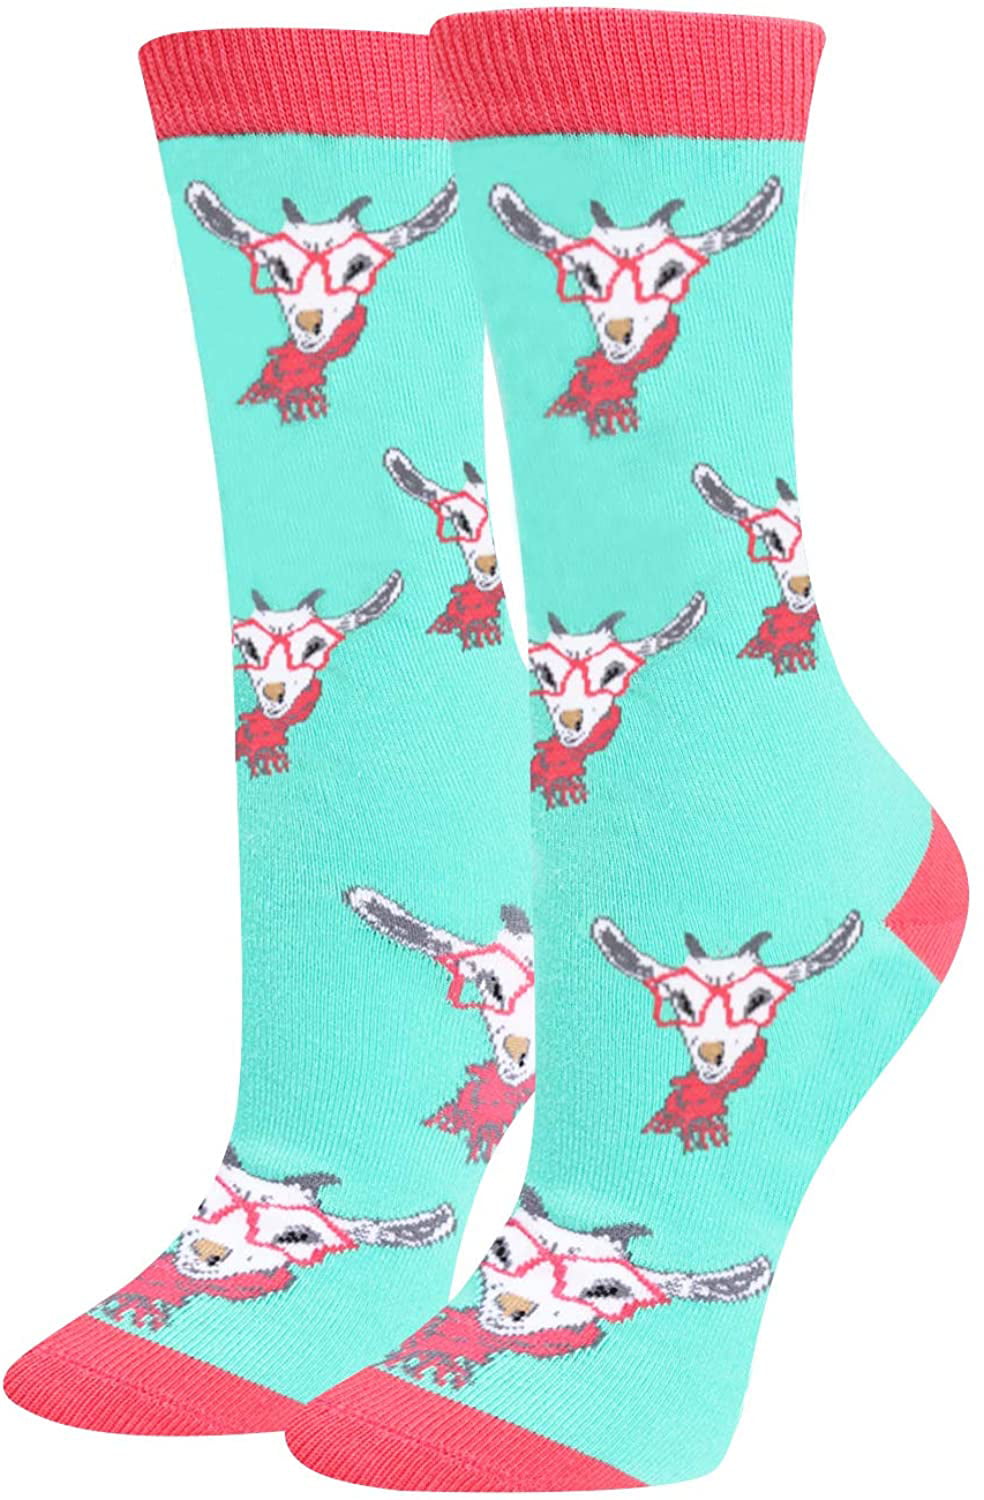 Teal Cute Cows on Teal Womens Novelty Ankle Socks Adult One Size 